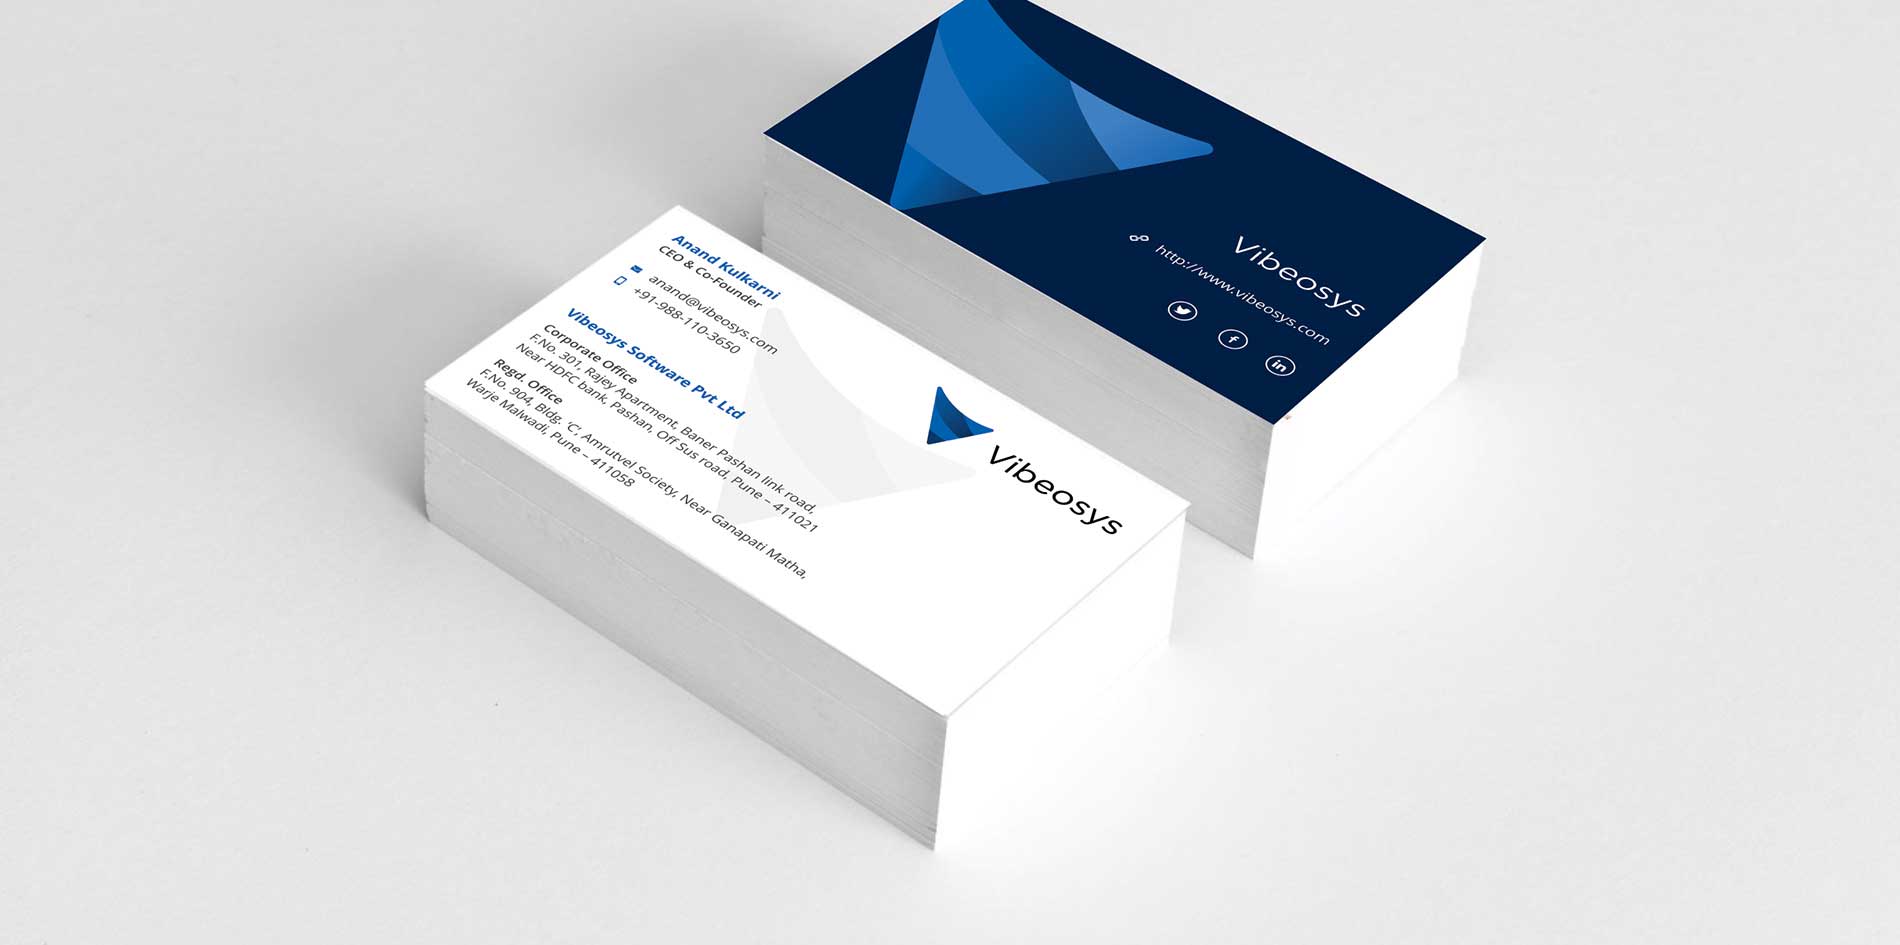 img/vibeosys/vibeosys-business-card-xl.png